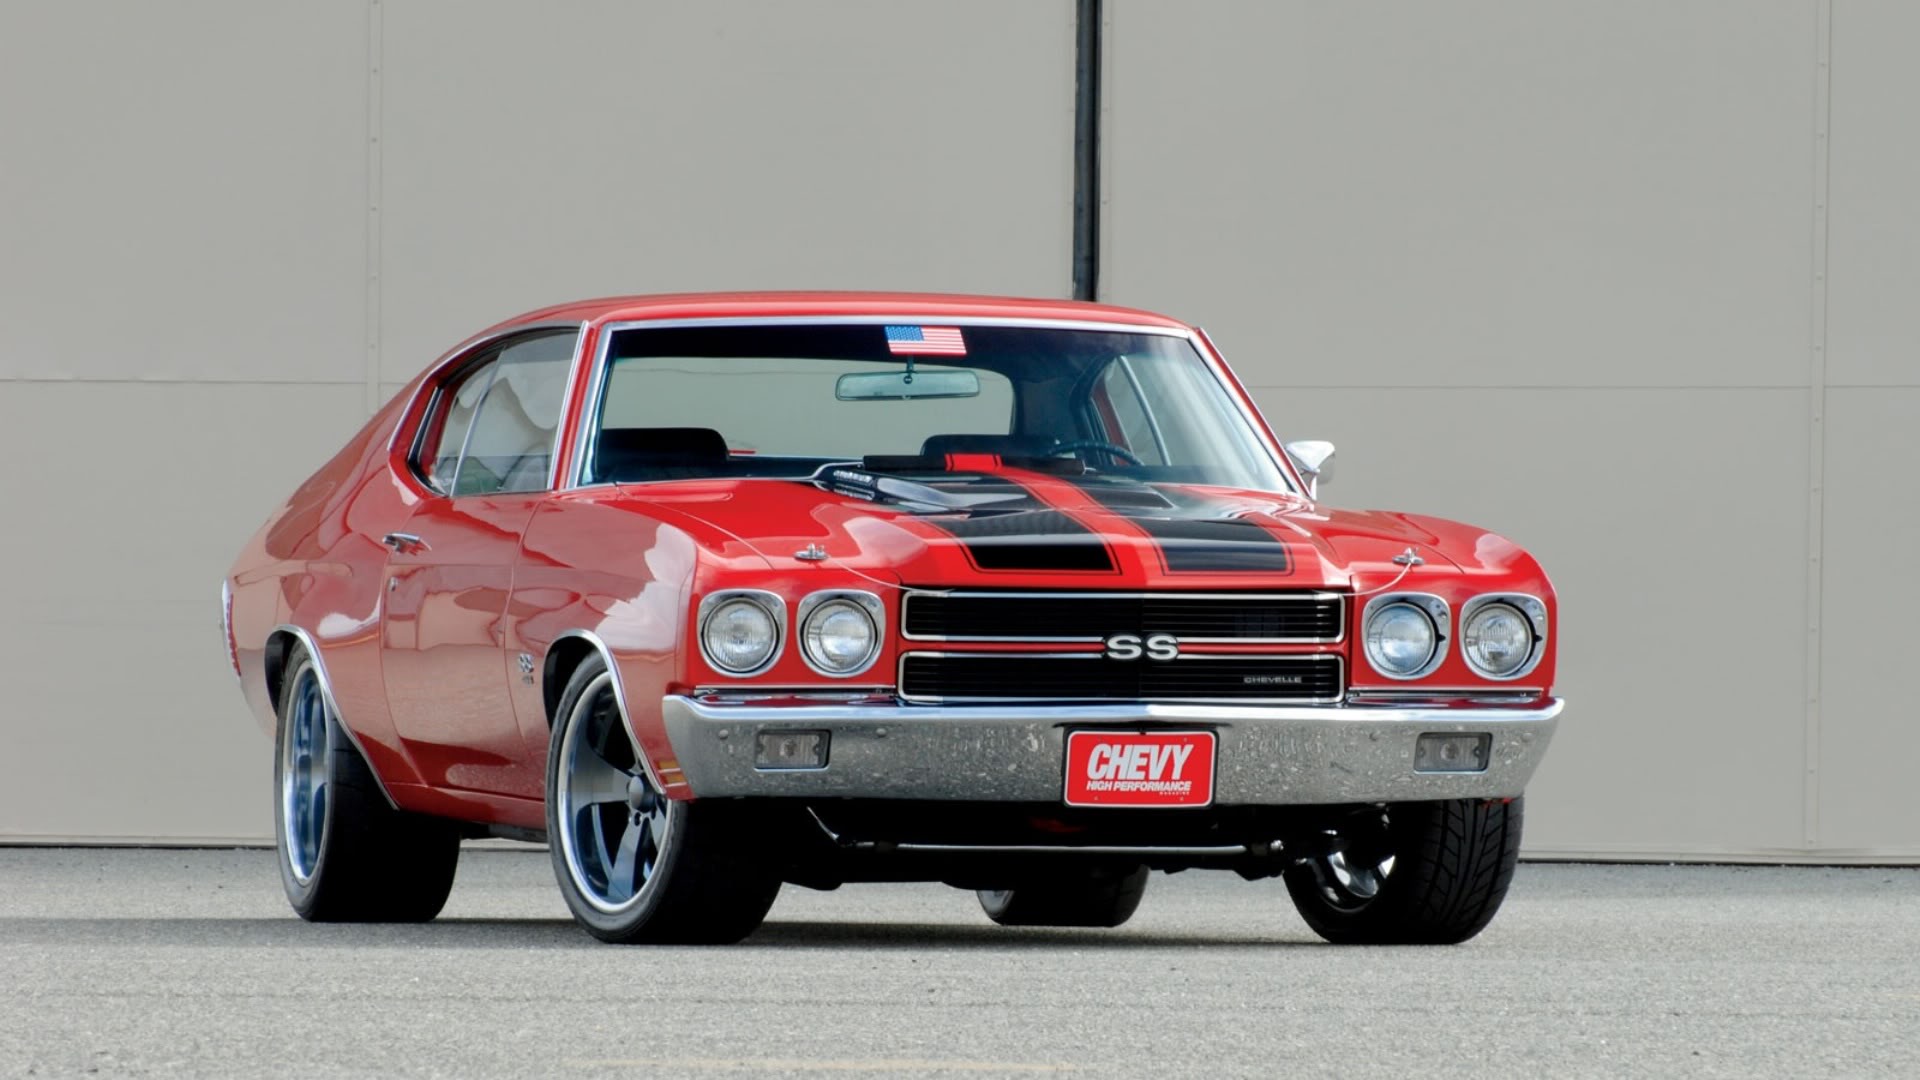 1970 Red Chevy Chevelle SS 454 wallpaper background